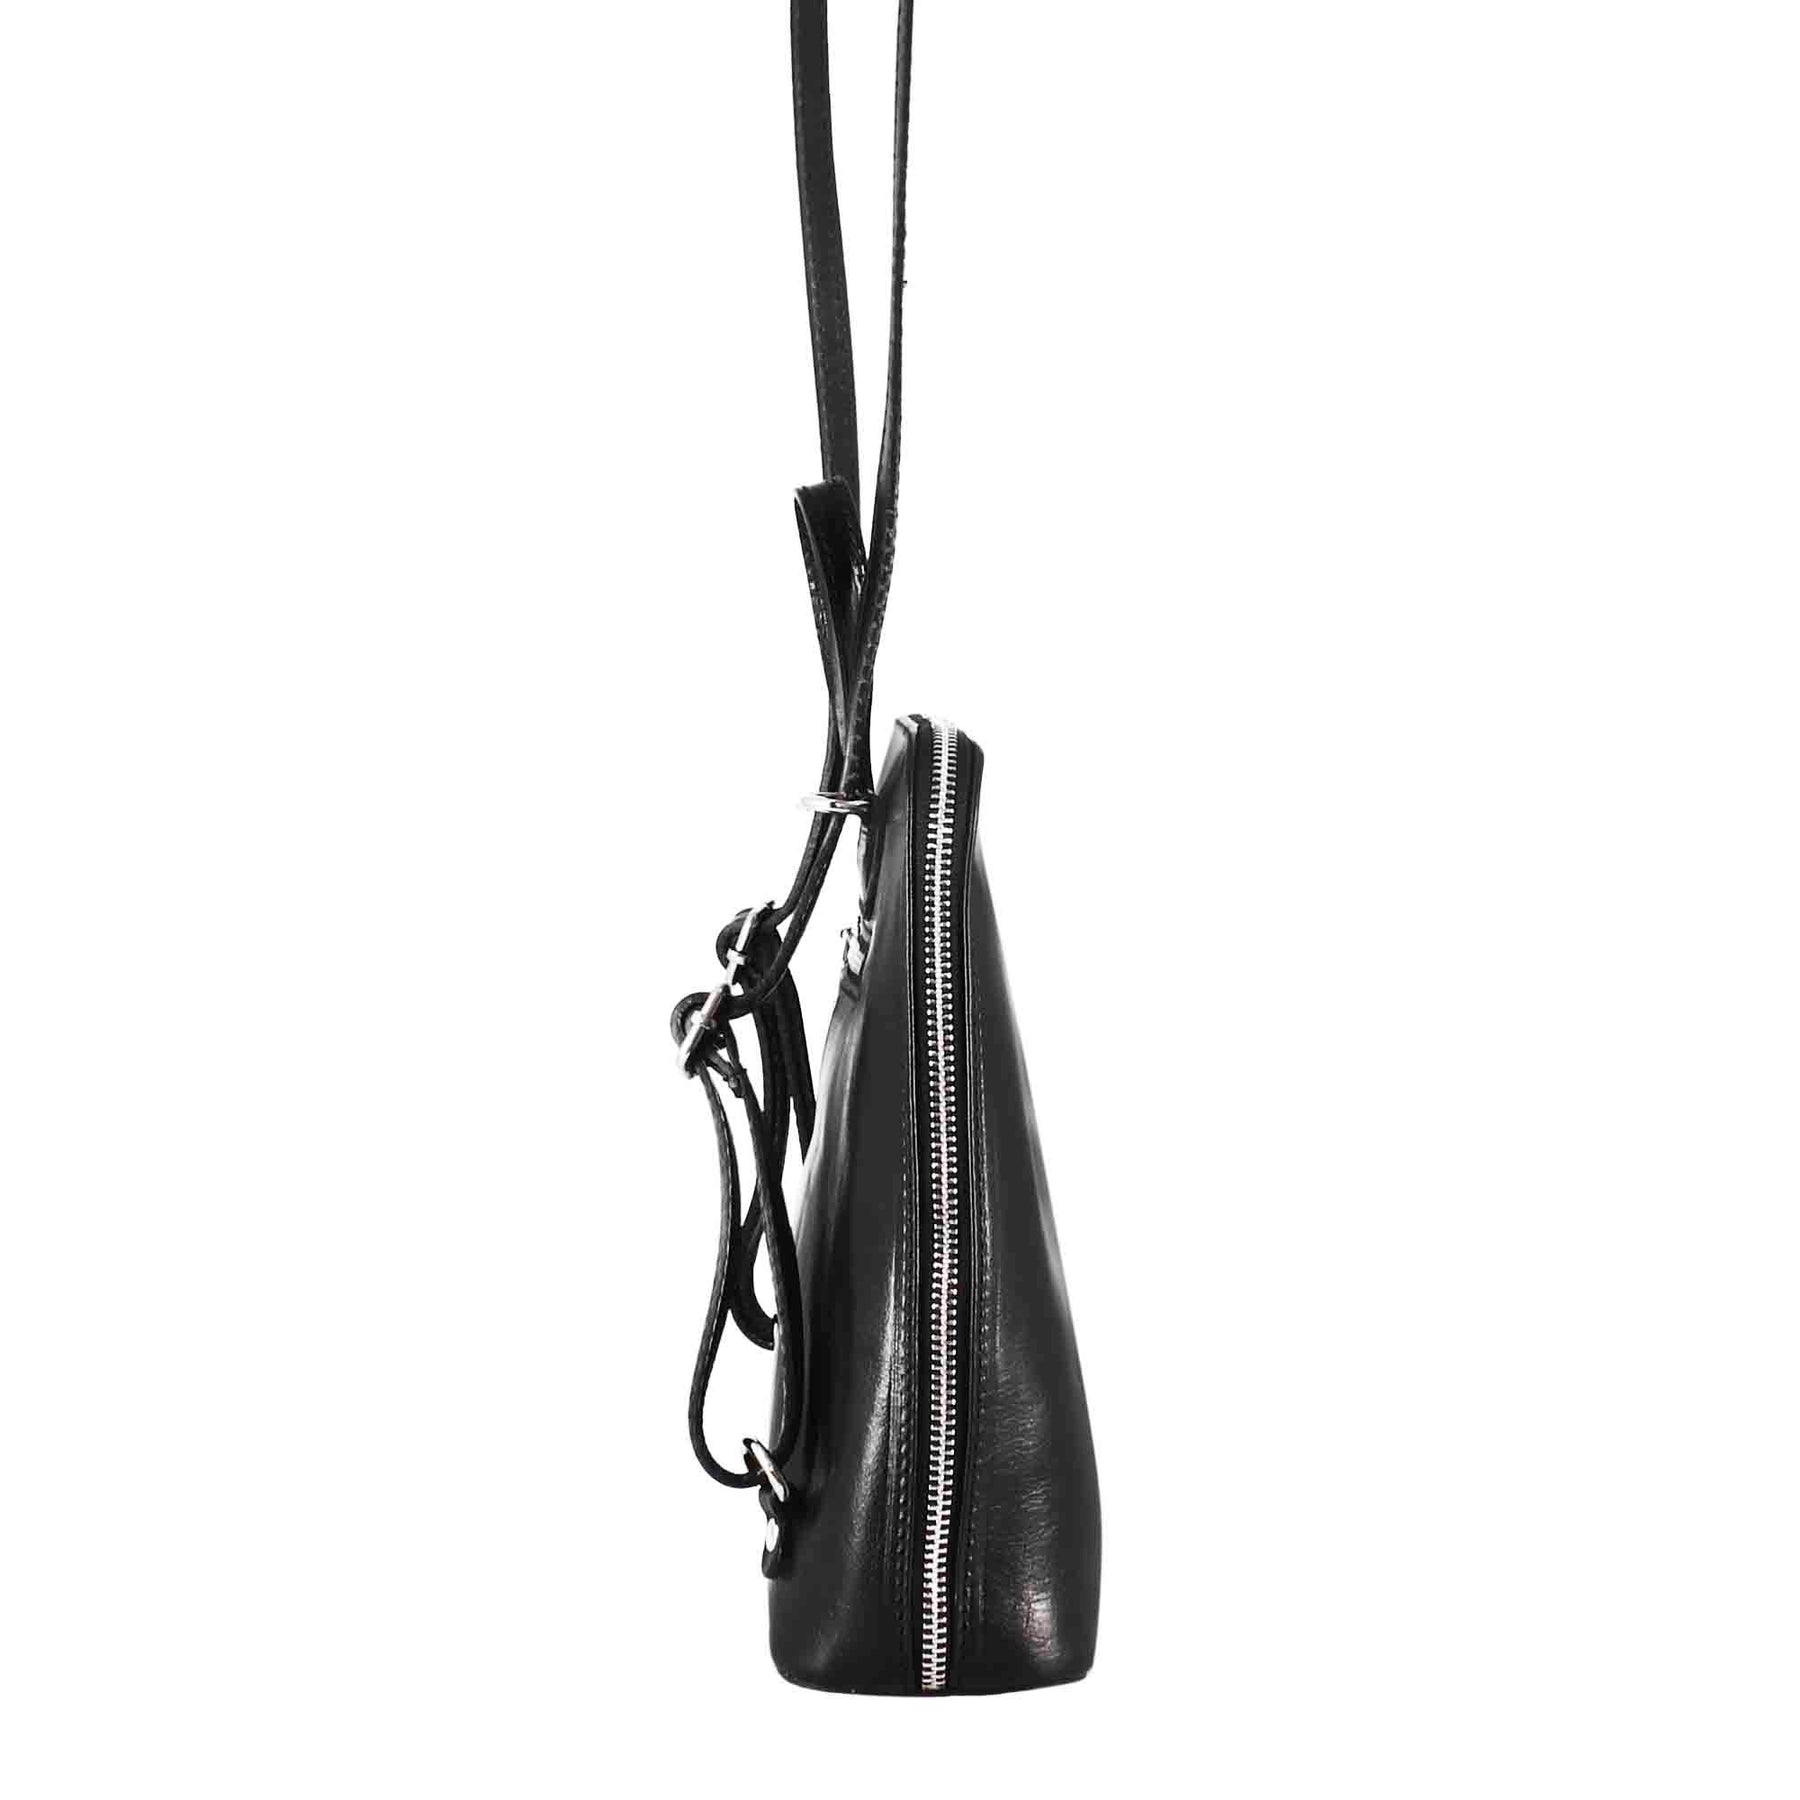 Women's Ginevra backpack in smooth black leather with zip